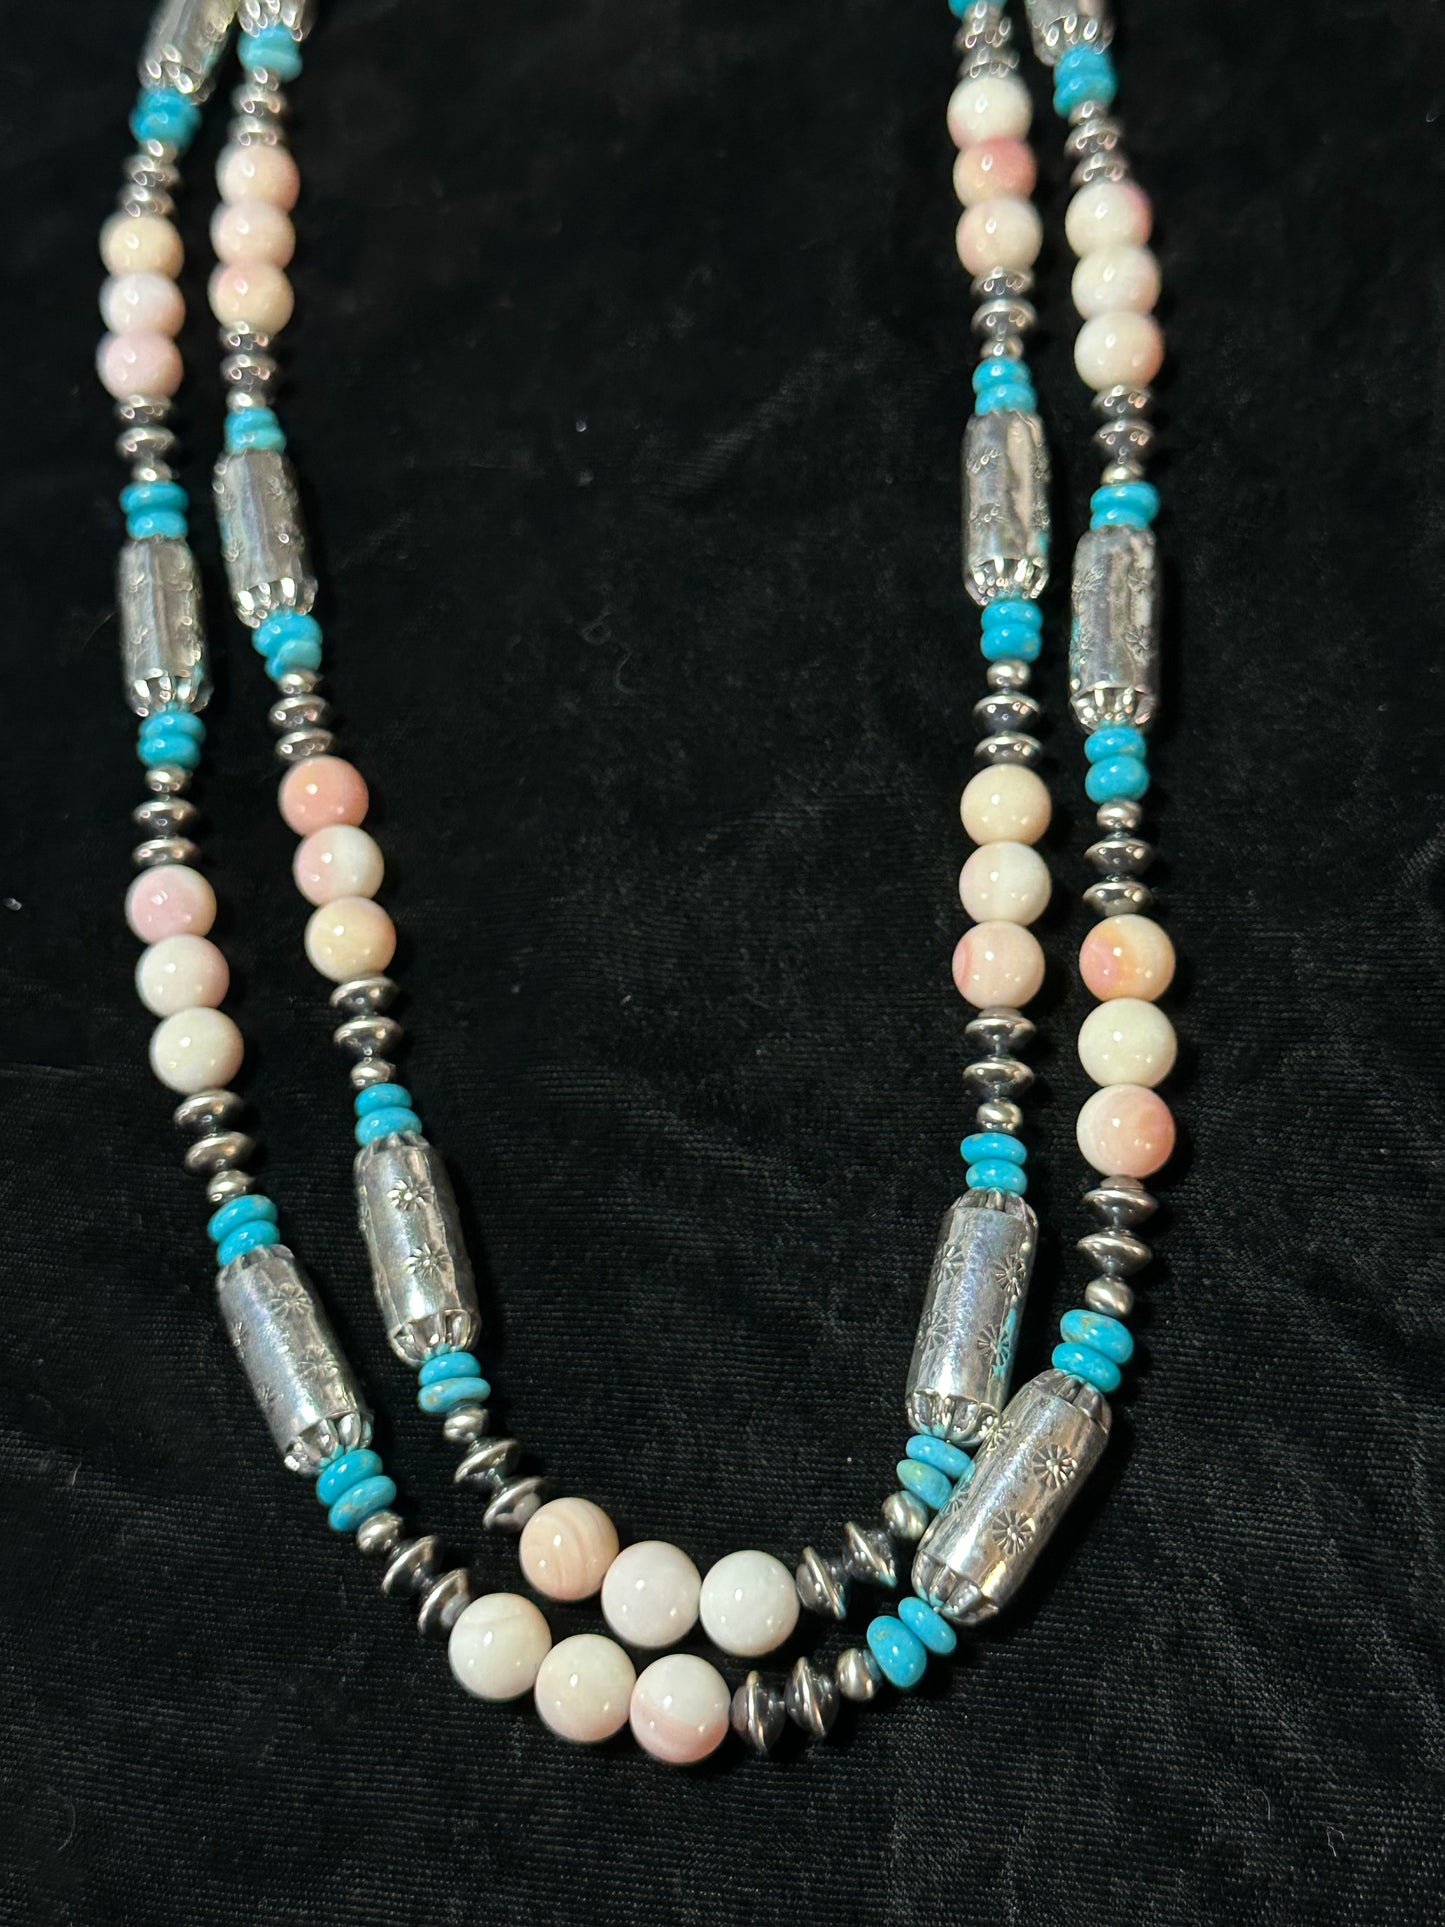 60" Stamped Barrel Beads, Pink Conch Shell Beads, Navajo Saucers, and Sleeping Beauty Turquoise Beads